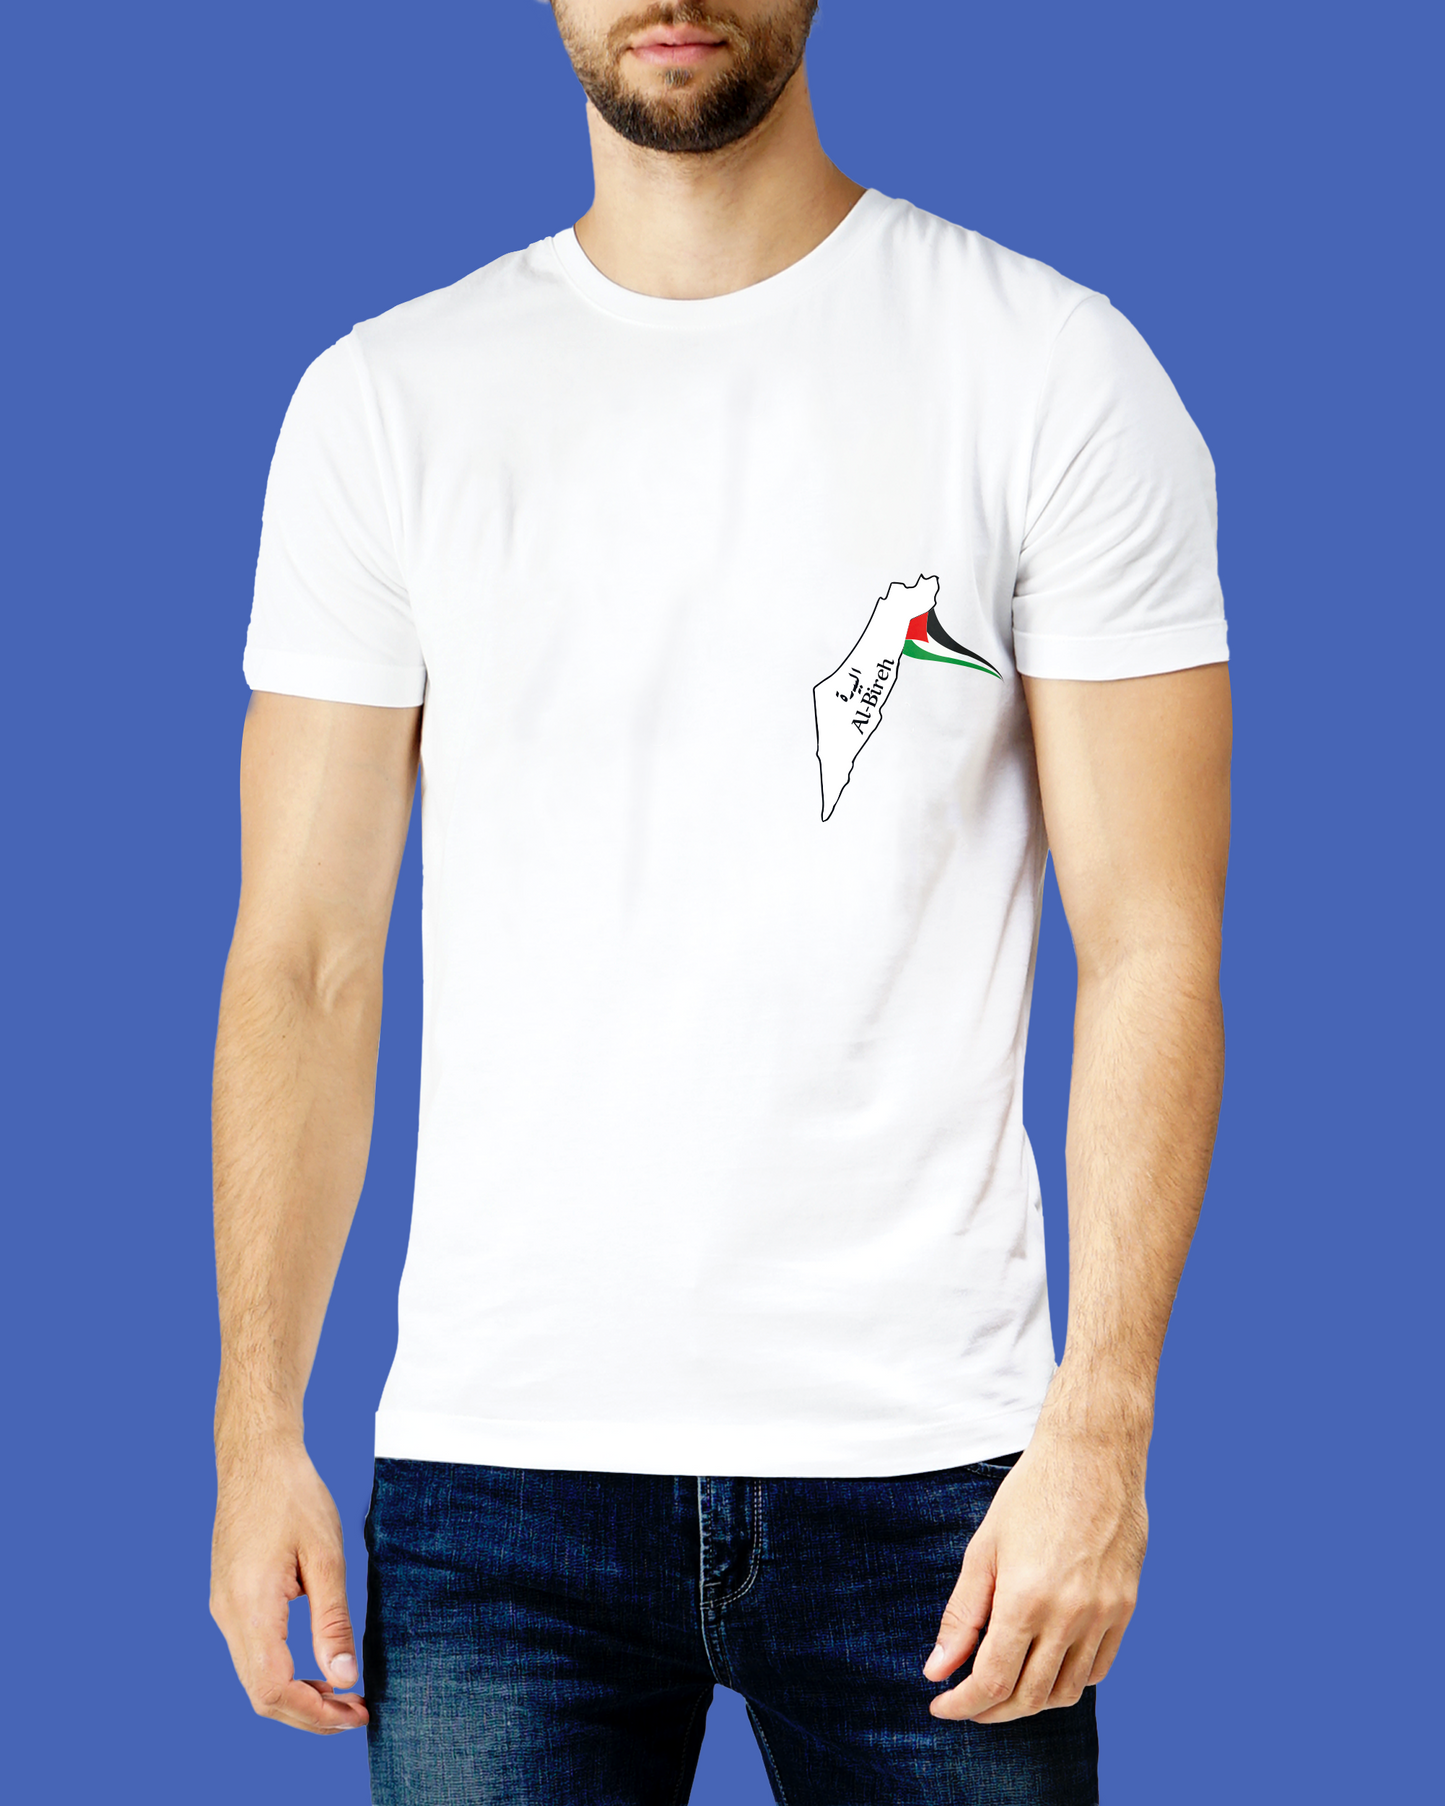 Arab & Palestinian Heritage: Sublimated Tees Collection